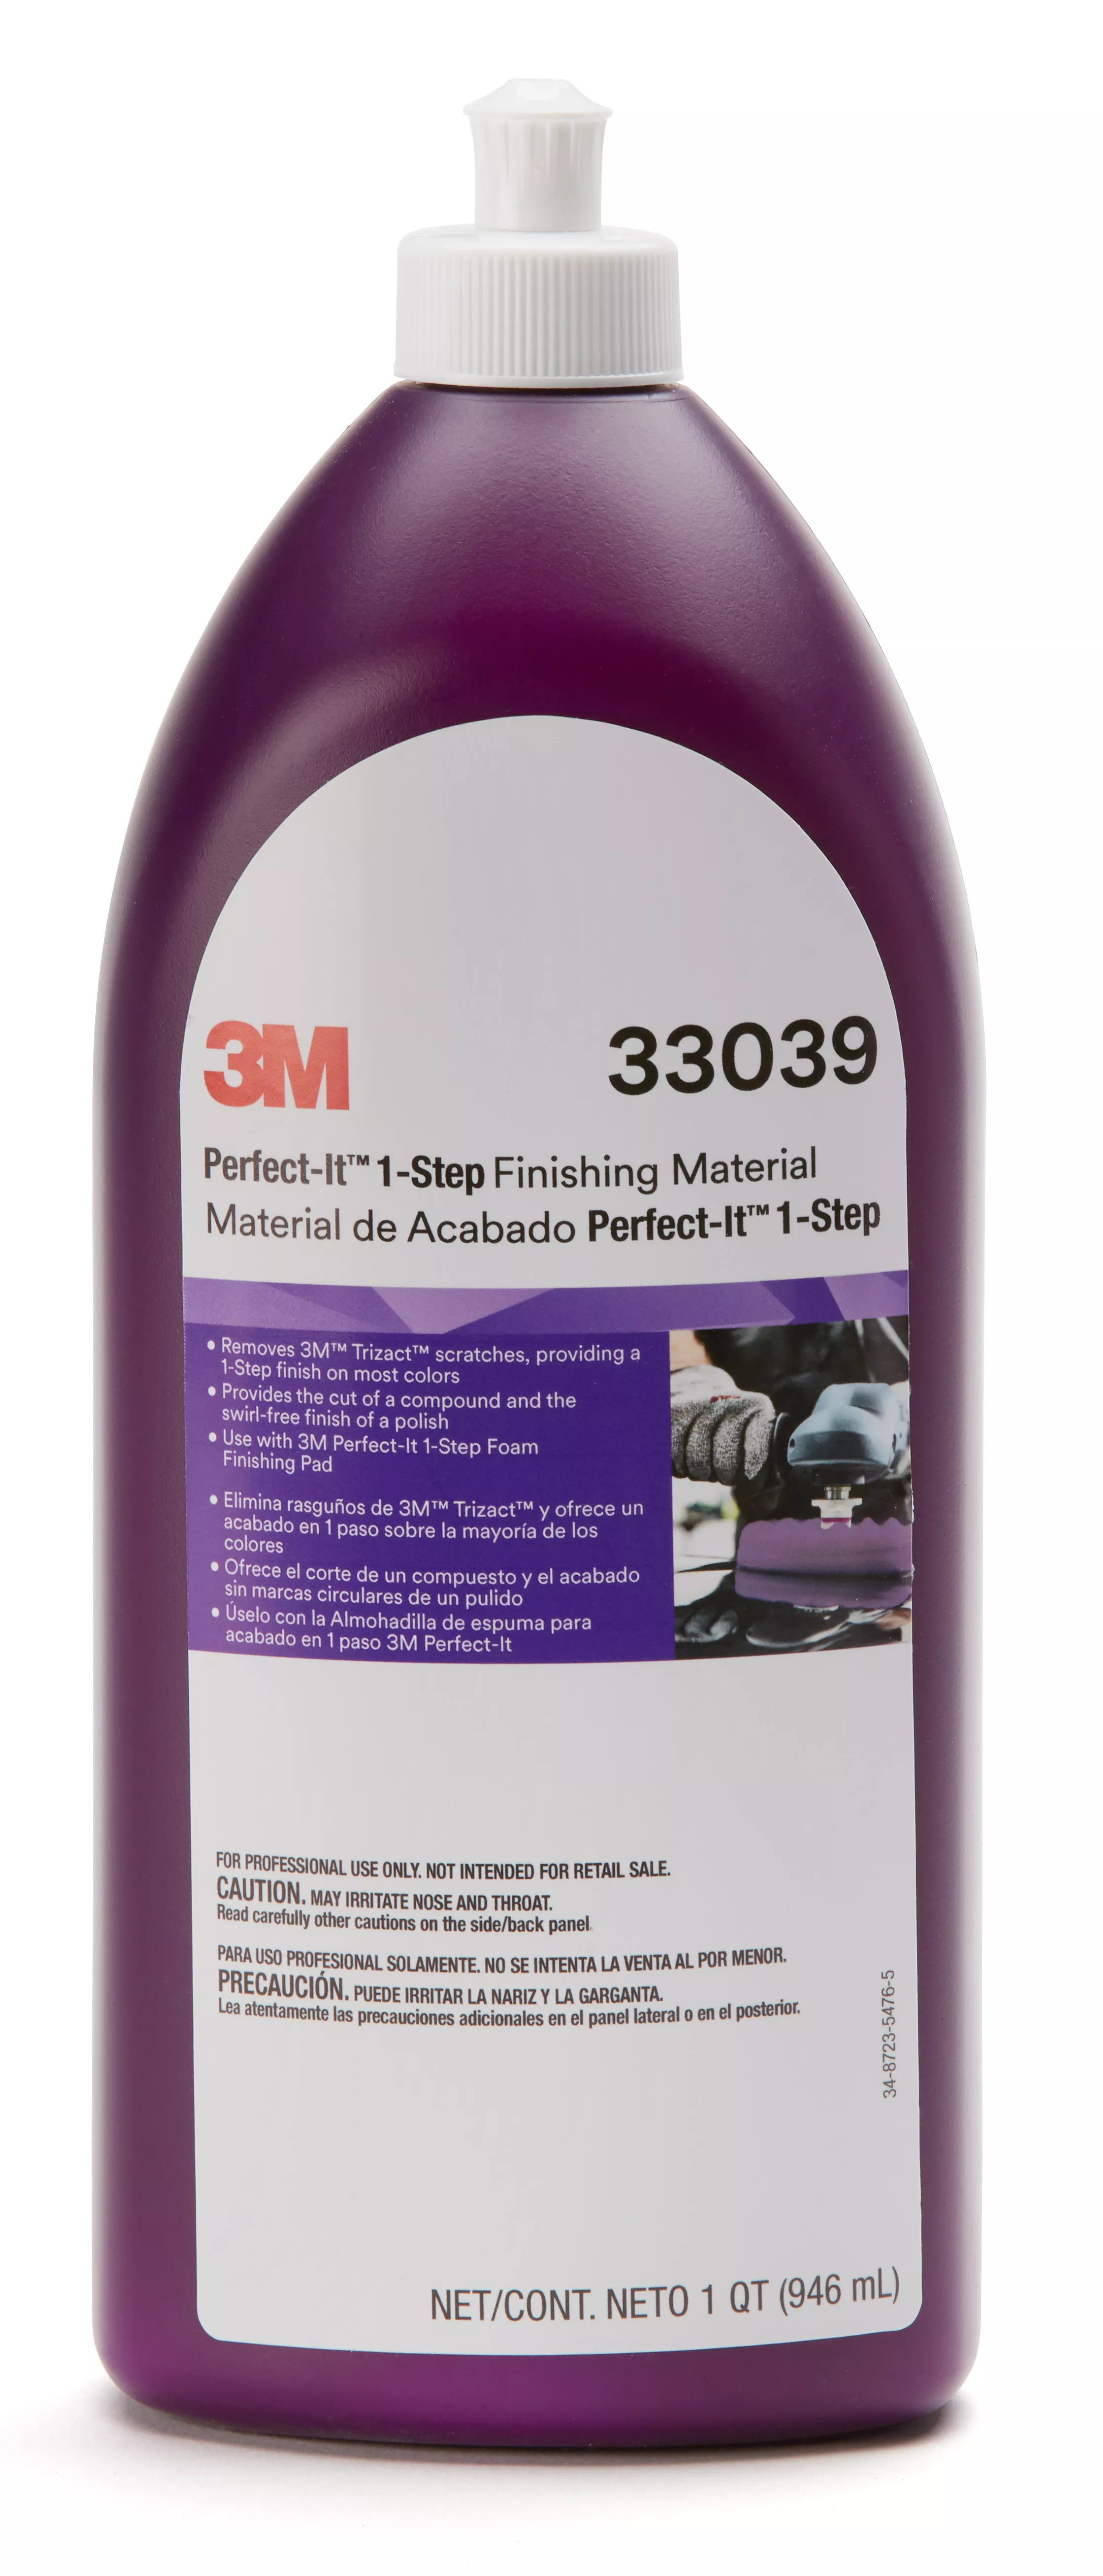 SKU 7100210662 | 3M™ Perfect-It™ 1-Step Finishing Material